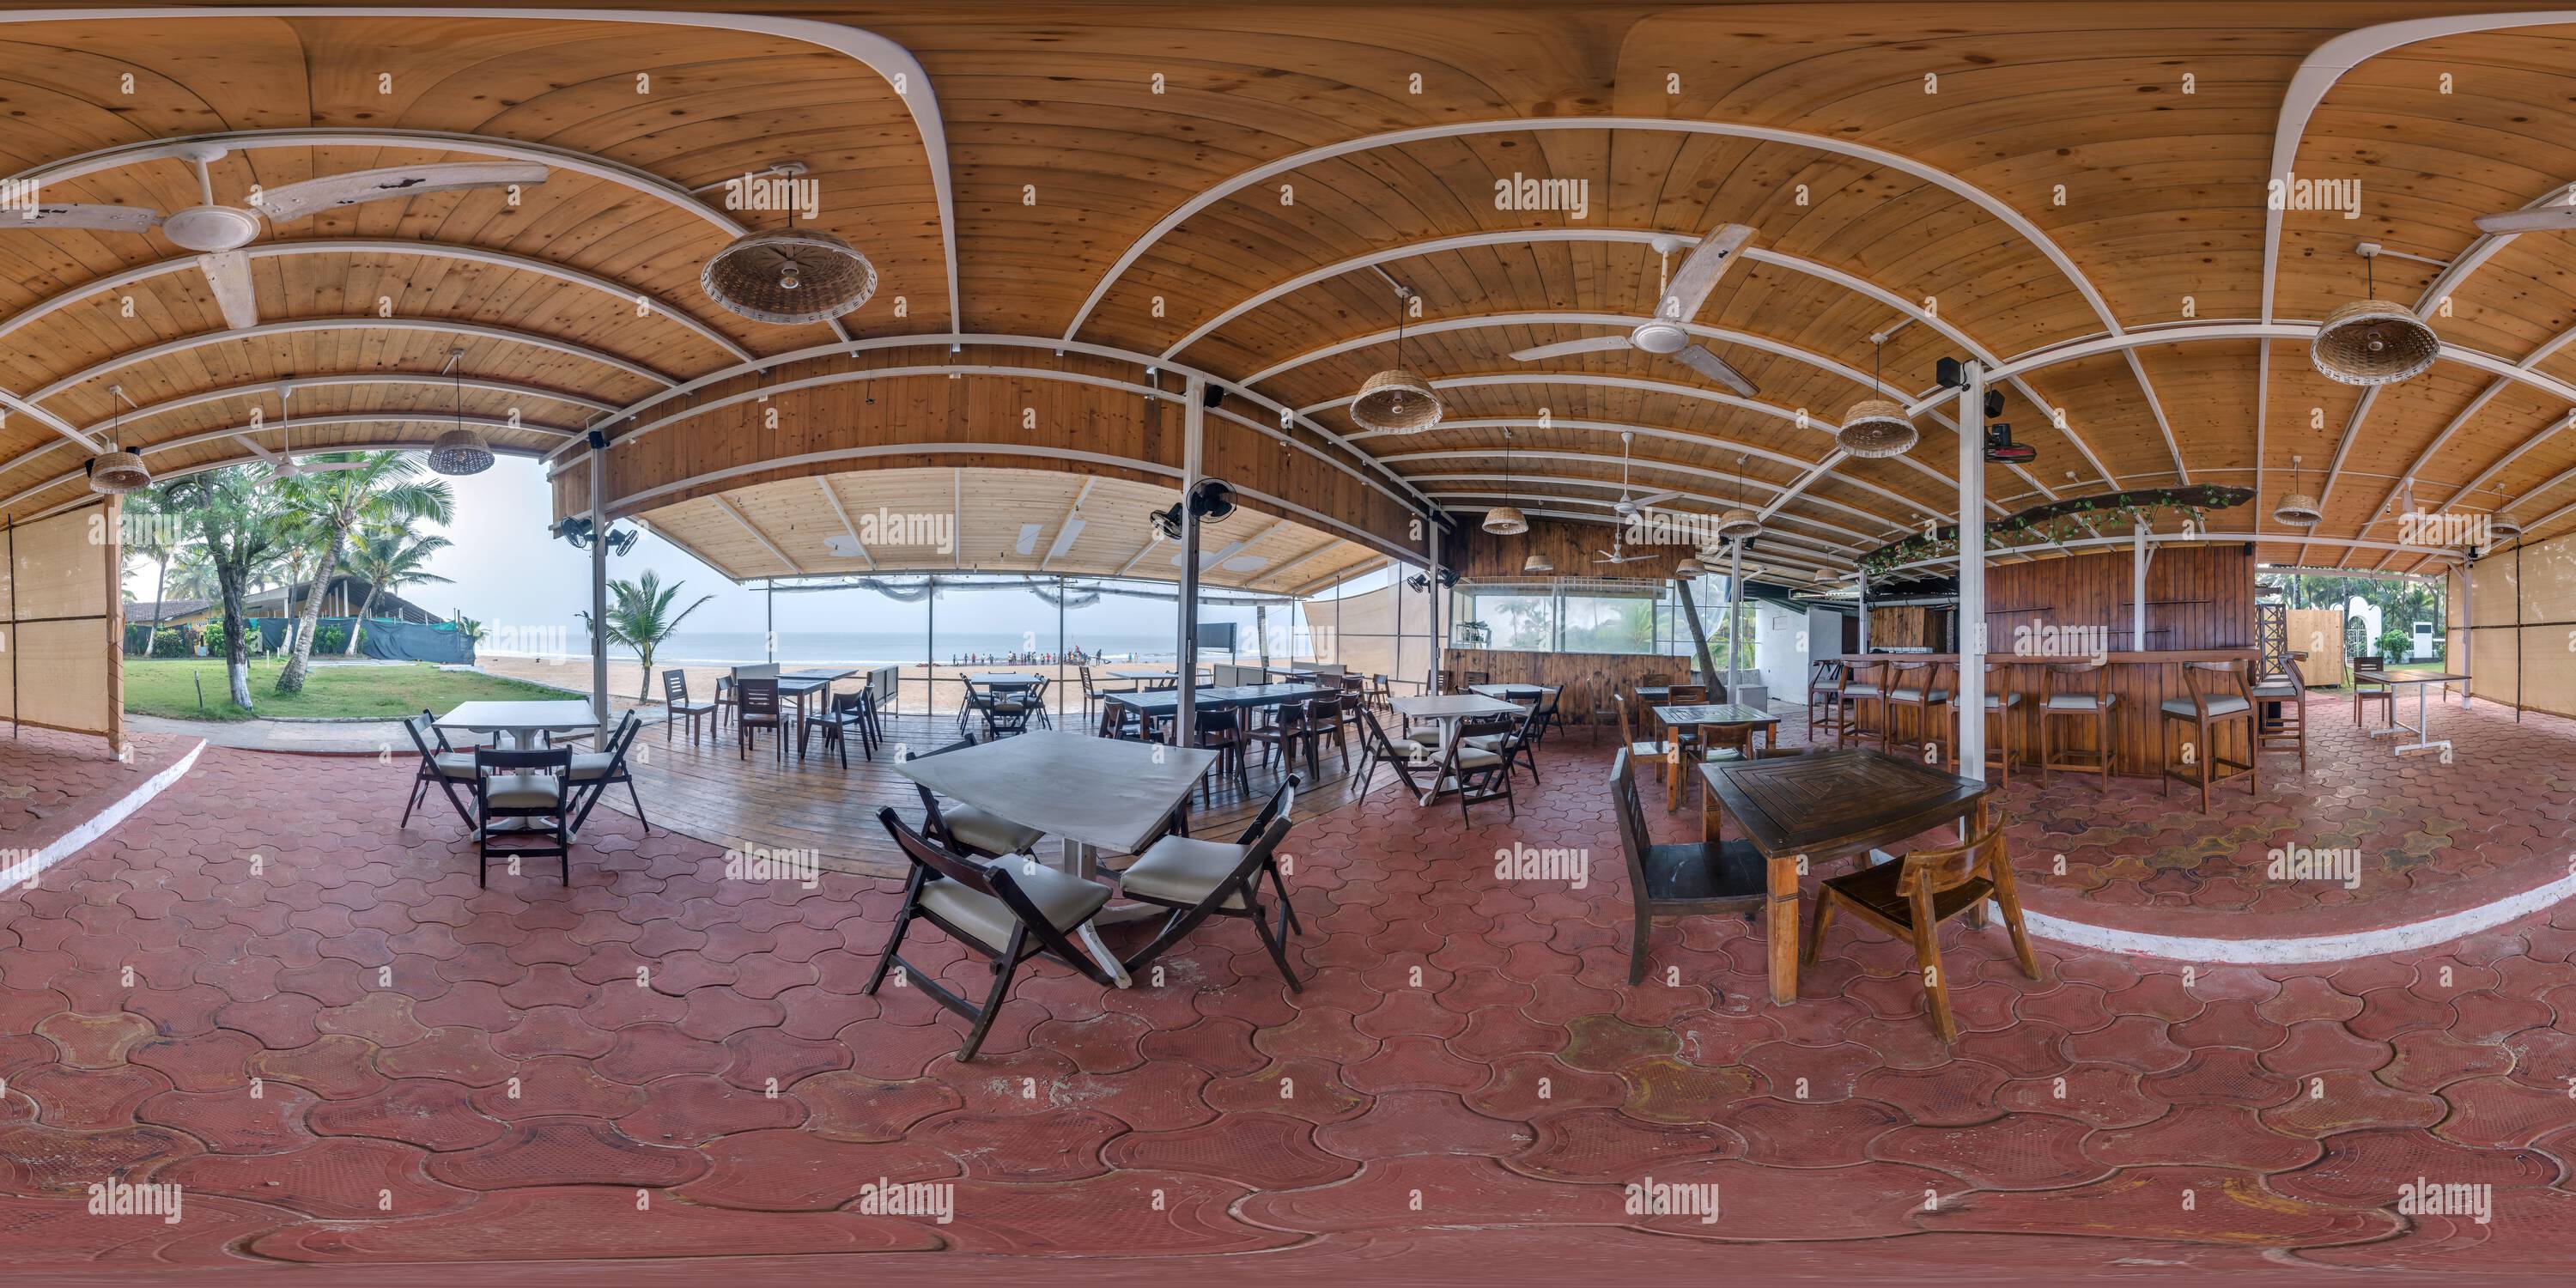 360 degree panoramic view of 360 hdri panorama inside tropical shack or open air cafe on beach with coconut trees on ocean coast in equirectangular spherical seamless projection,